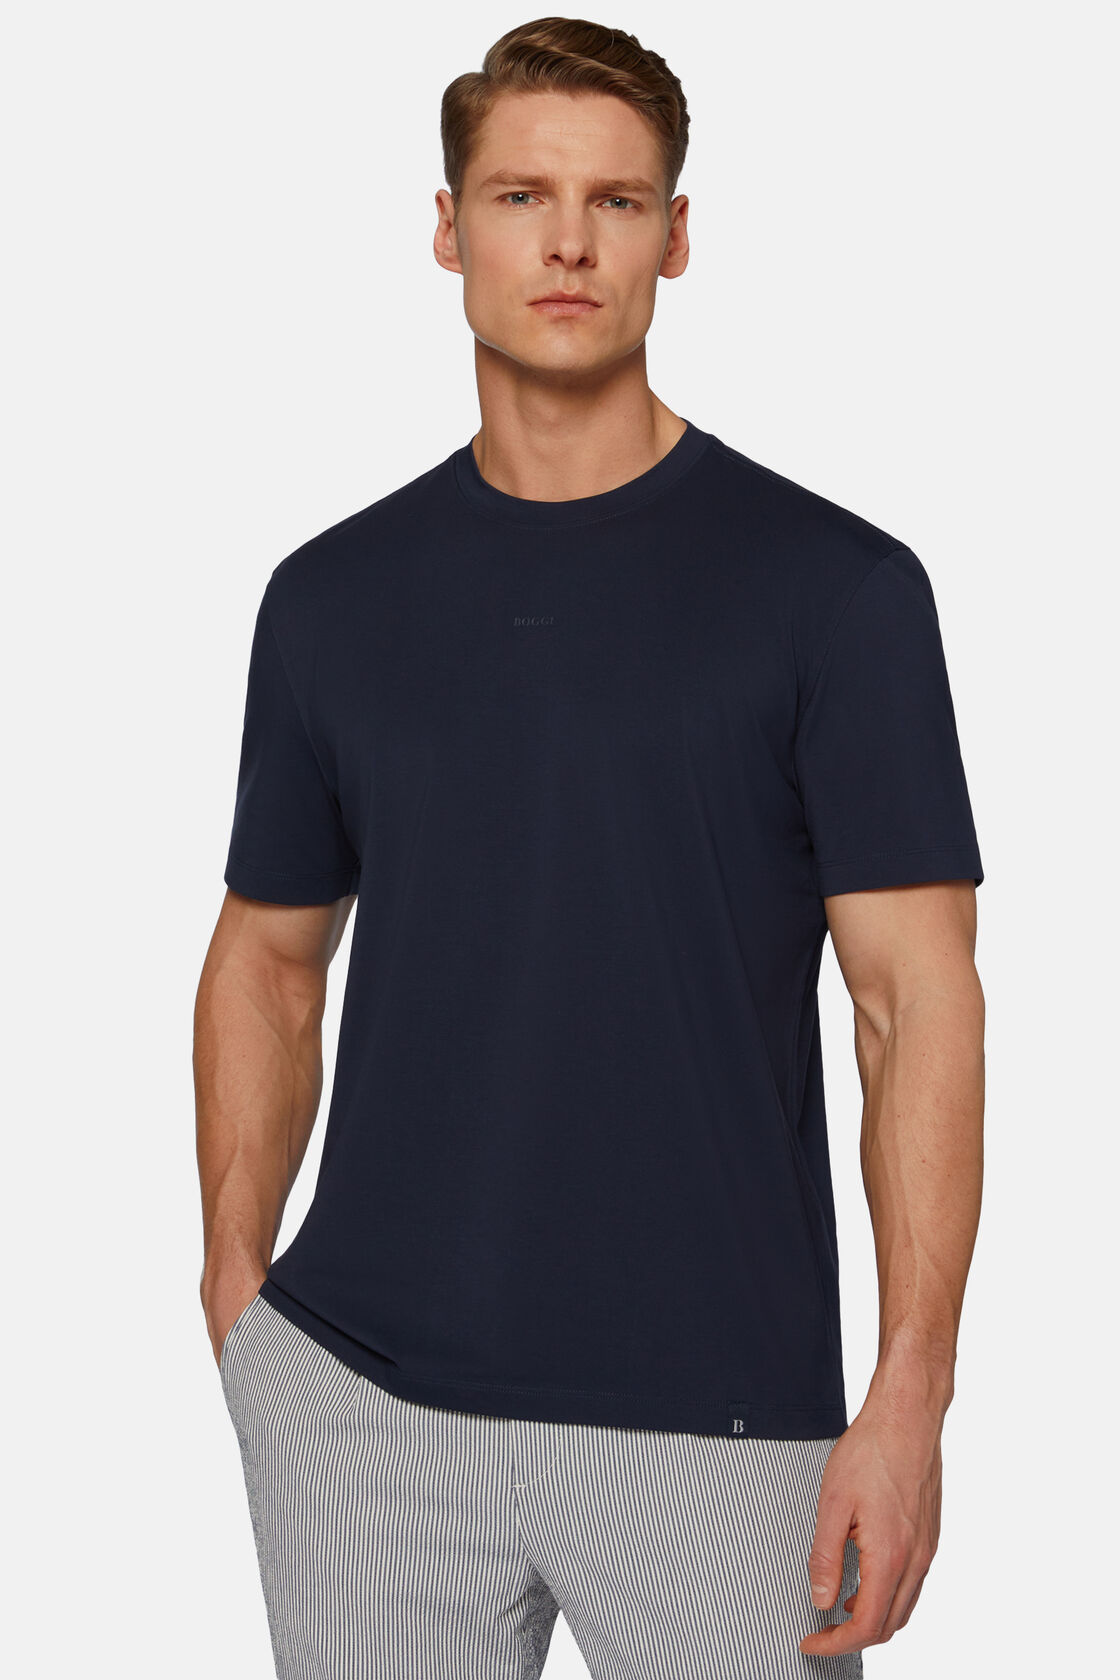 T-Shirt In Stretch Supima Cotton, Navy blue, hi-res